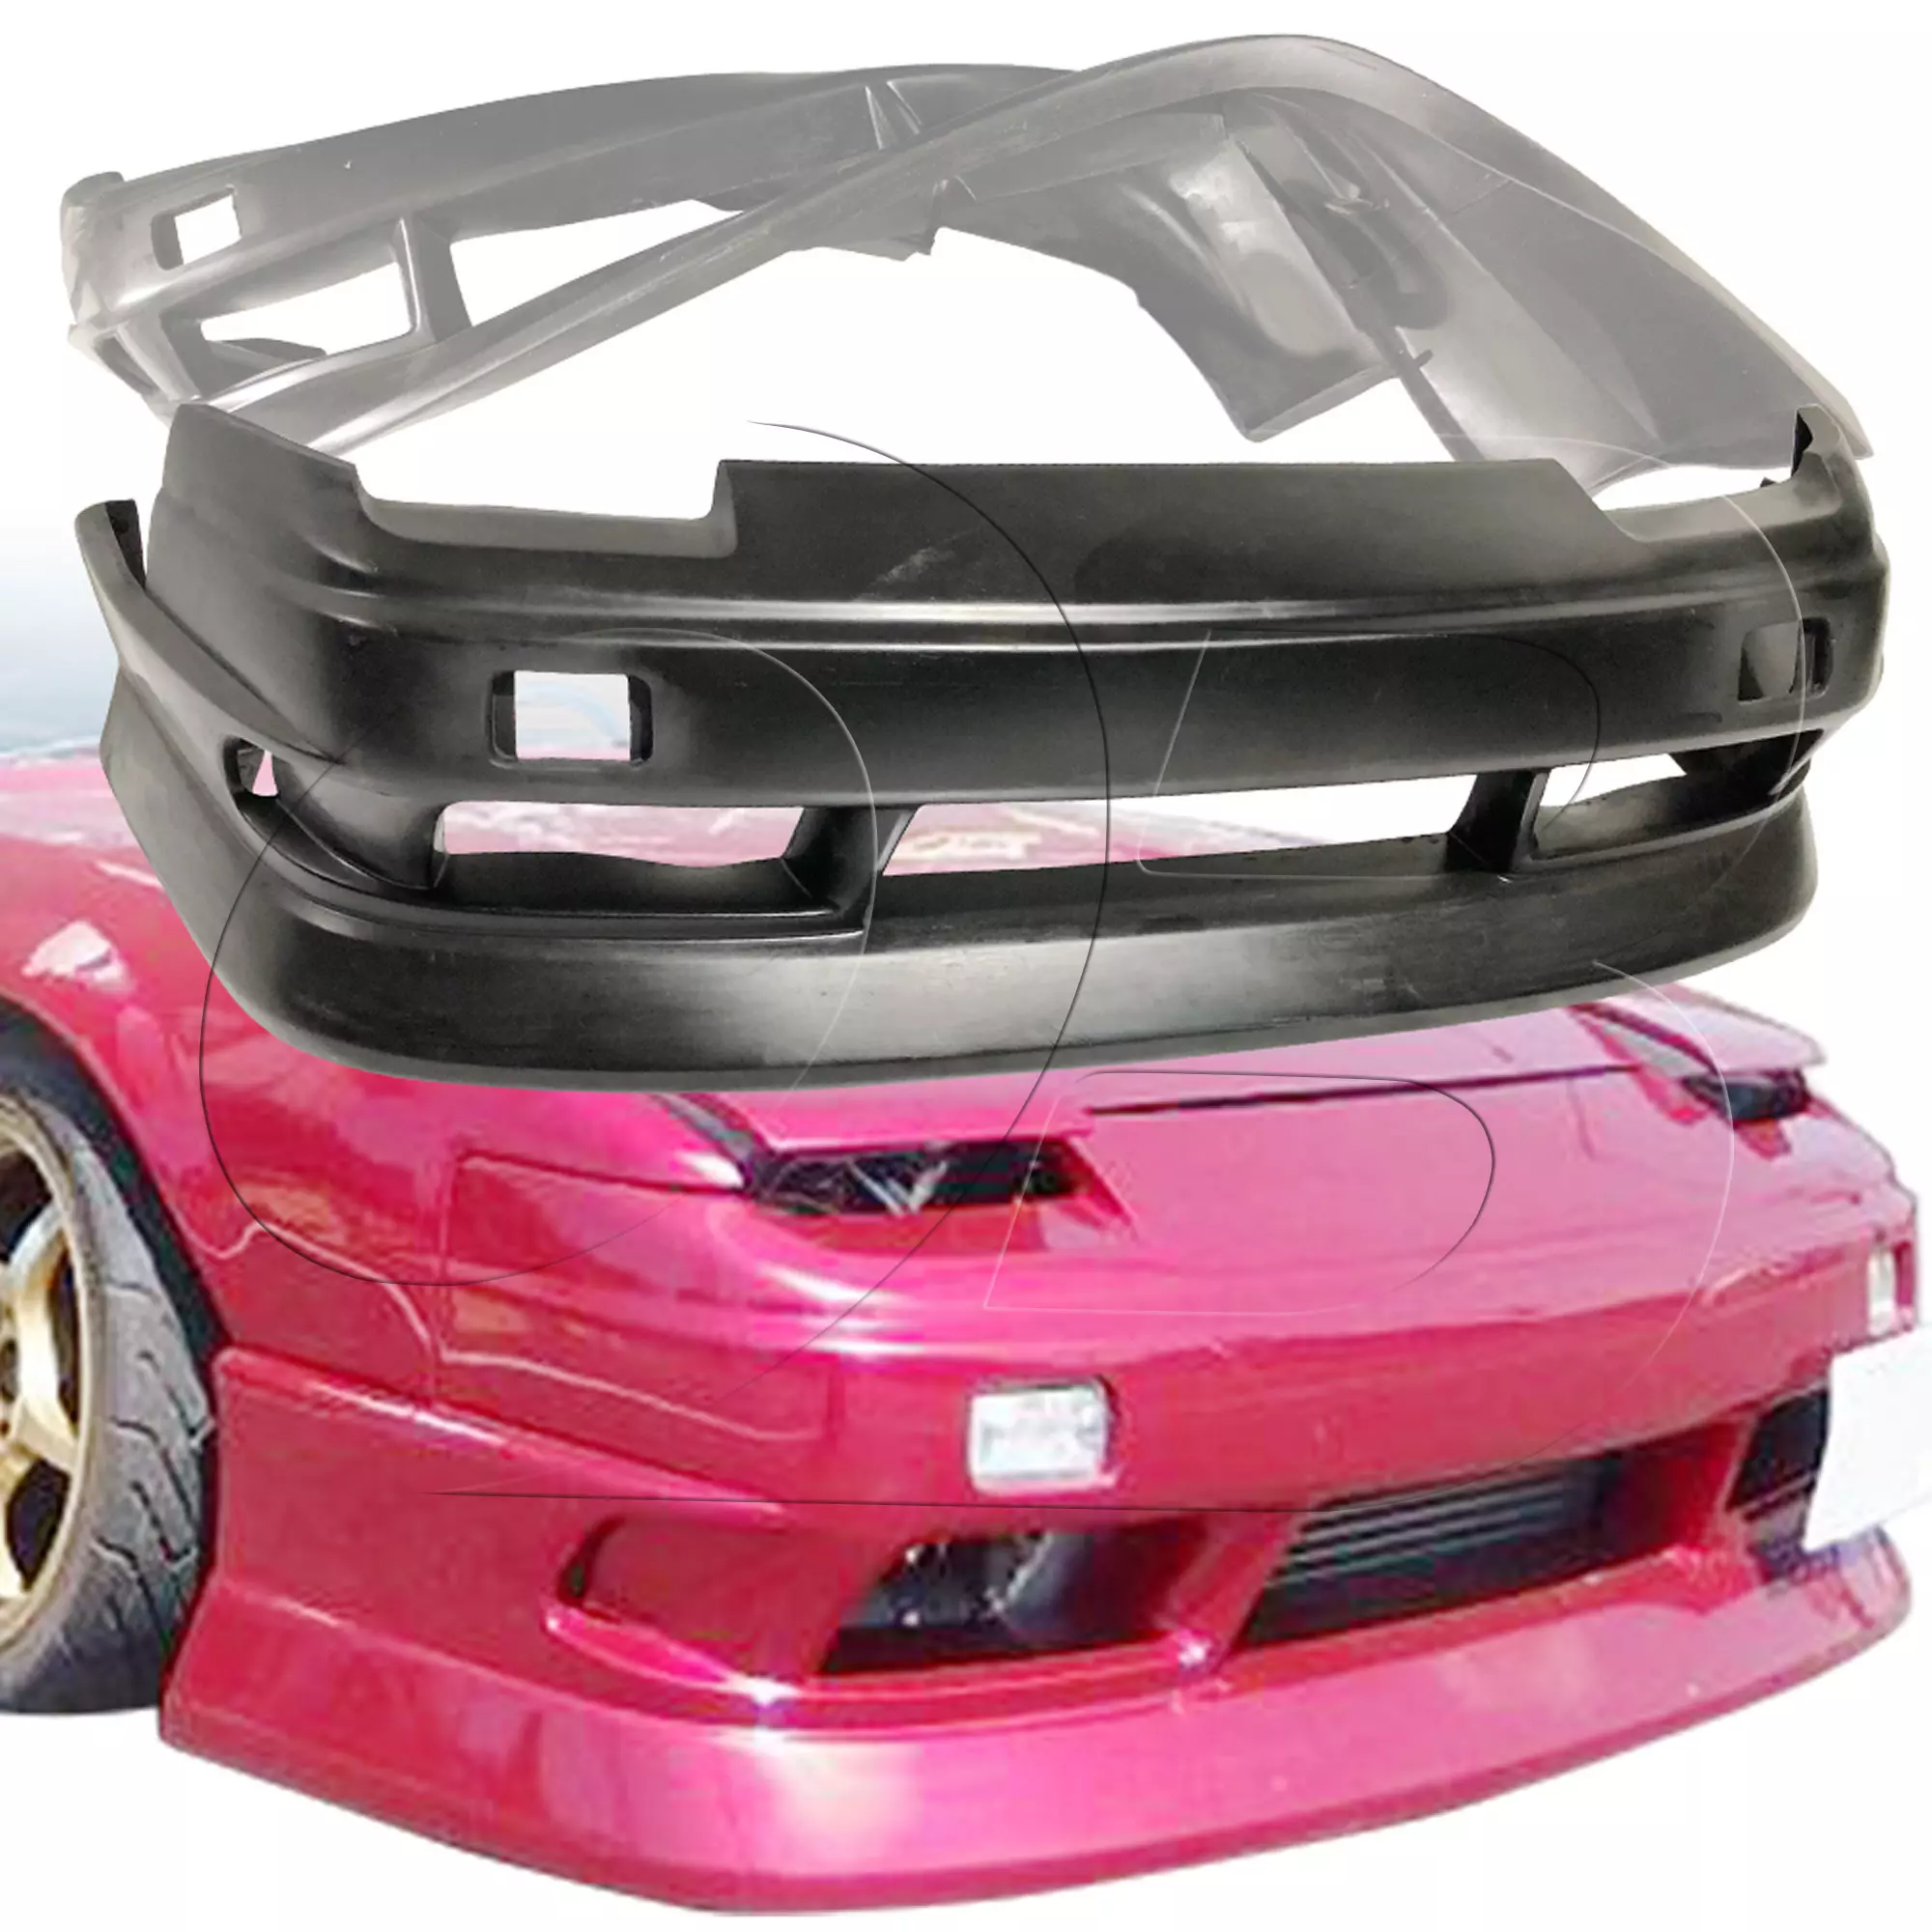 KBD Urethane Bsport2 Style 4pc Full Body Kit > Nissan 240SX 1989-1994 > 2dr Coupe - Image 17